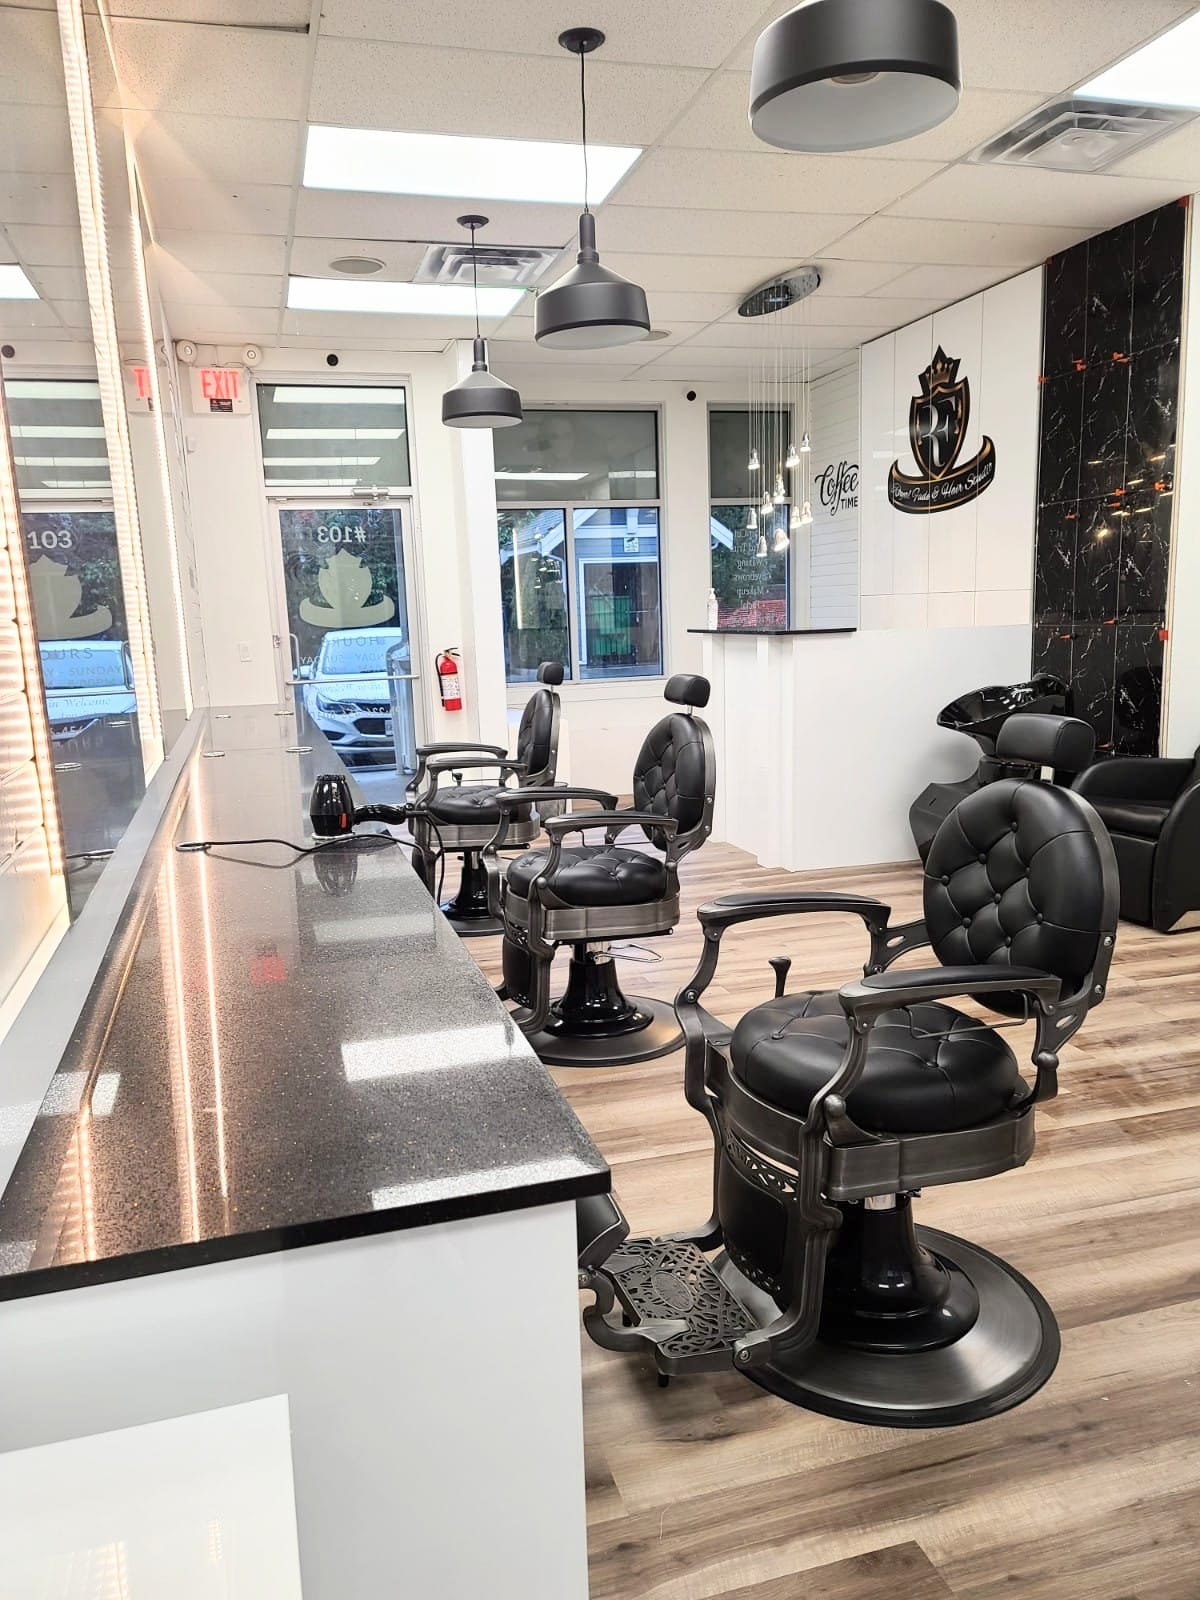 Surrey Hair and Beauty Salon - Inside view of Royal Fade